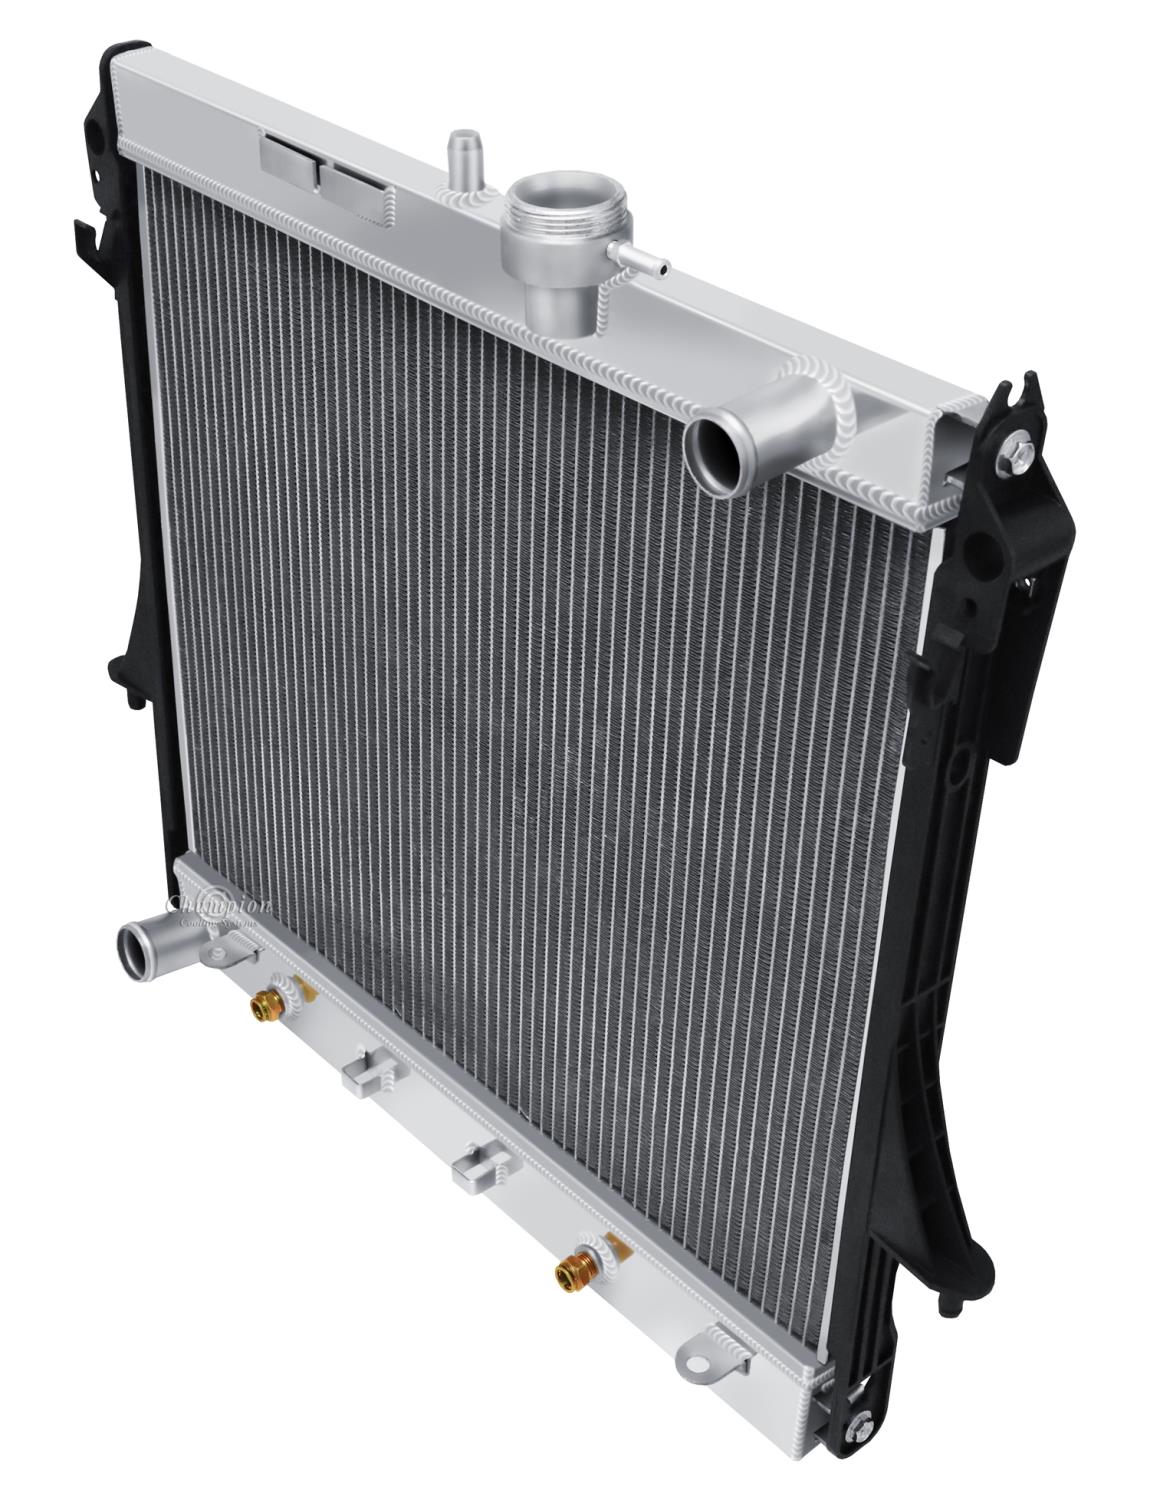 Replacement 1-Row Aluminum Radiator Fits Select 2006-2012 Chevy Colorado, GMC Canyon, Hummer H3/H3T V8 [Auto Transmission Only]